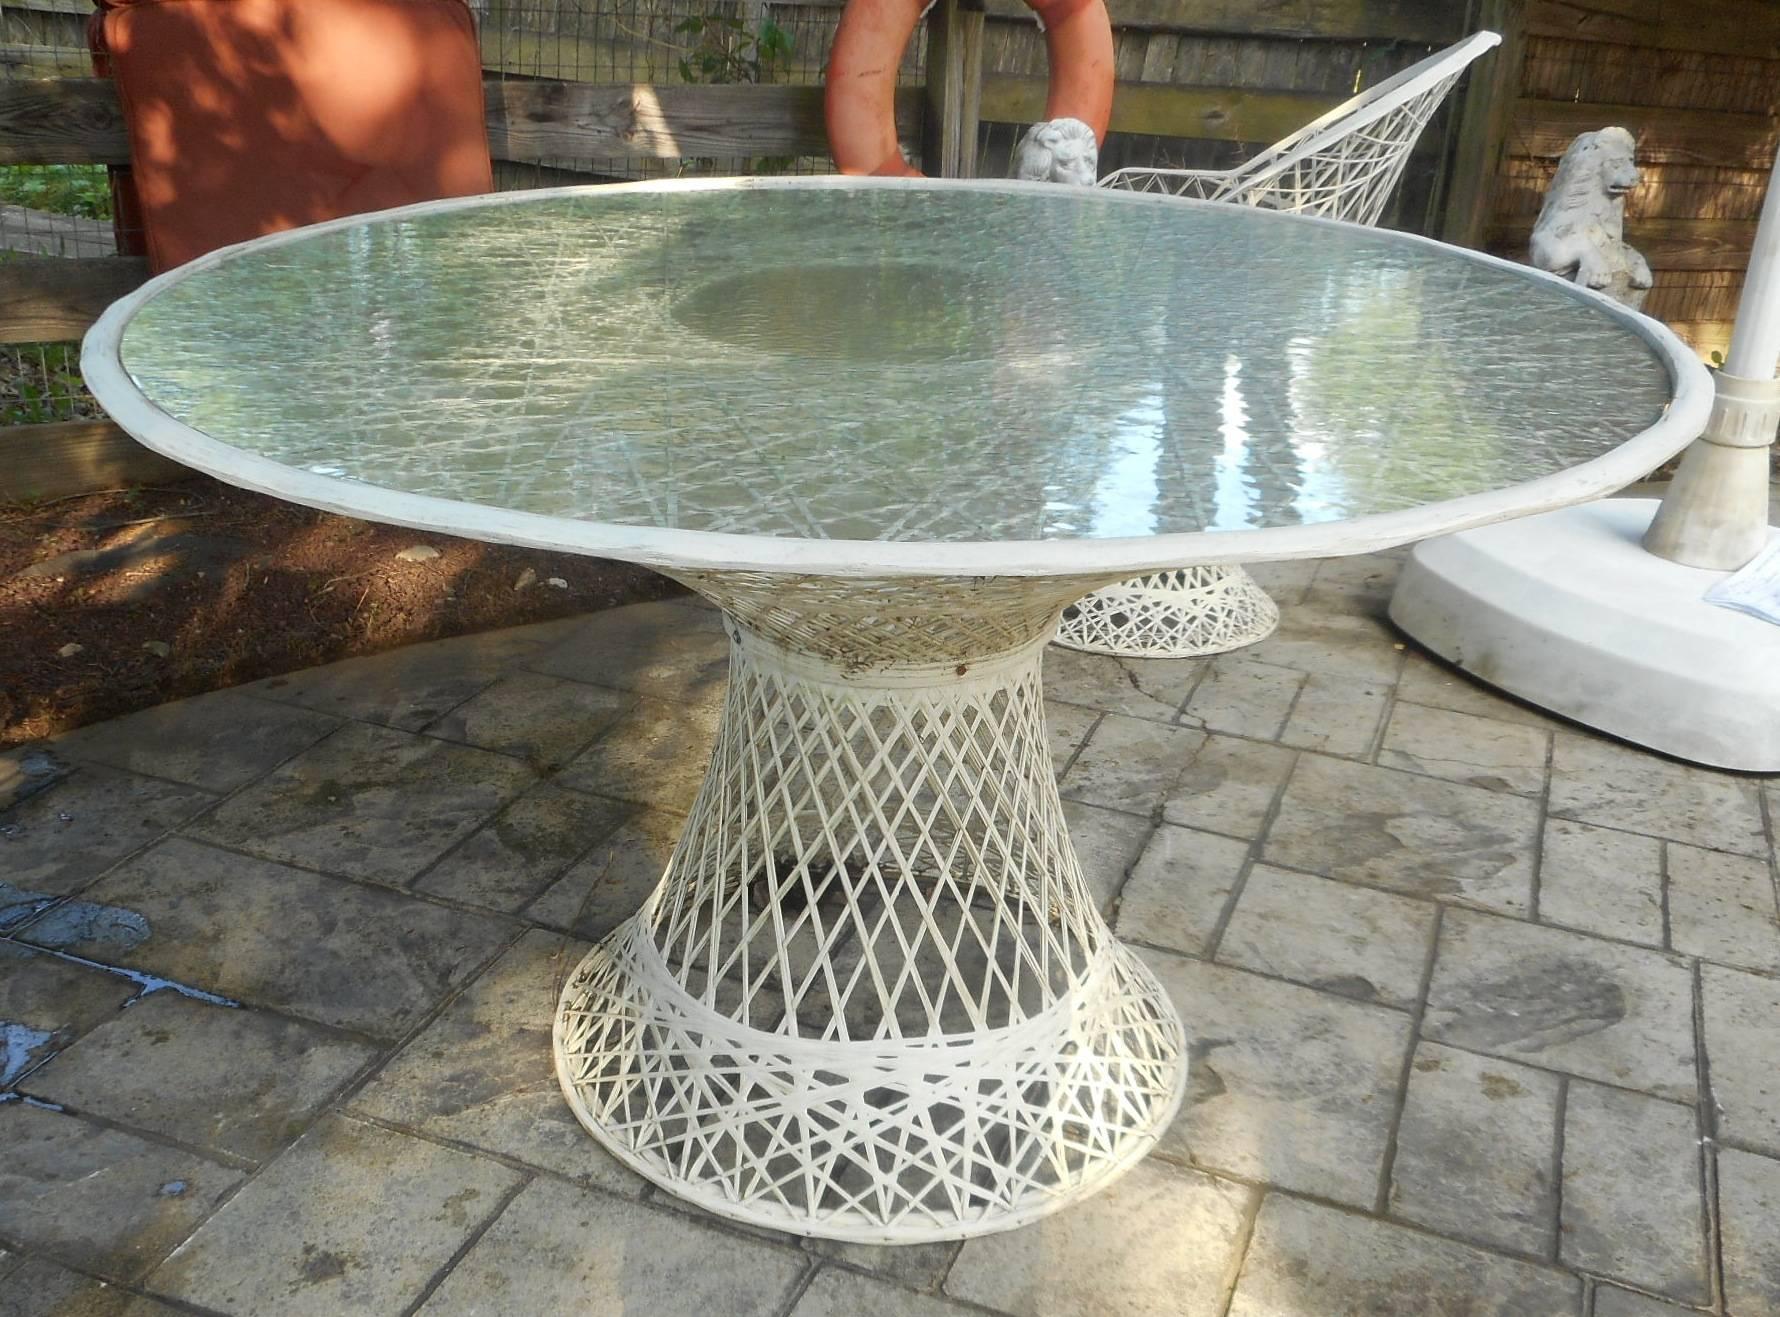 This beautiful vintage modern patio set includes four chairs and a round glass top dining table. Unique design made of woven fiberglass with tulip shaped bases. Extremely comfortable dining chairs with angled back rests and a matching table make the